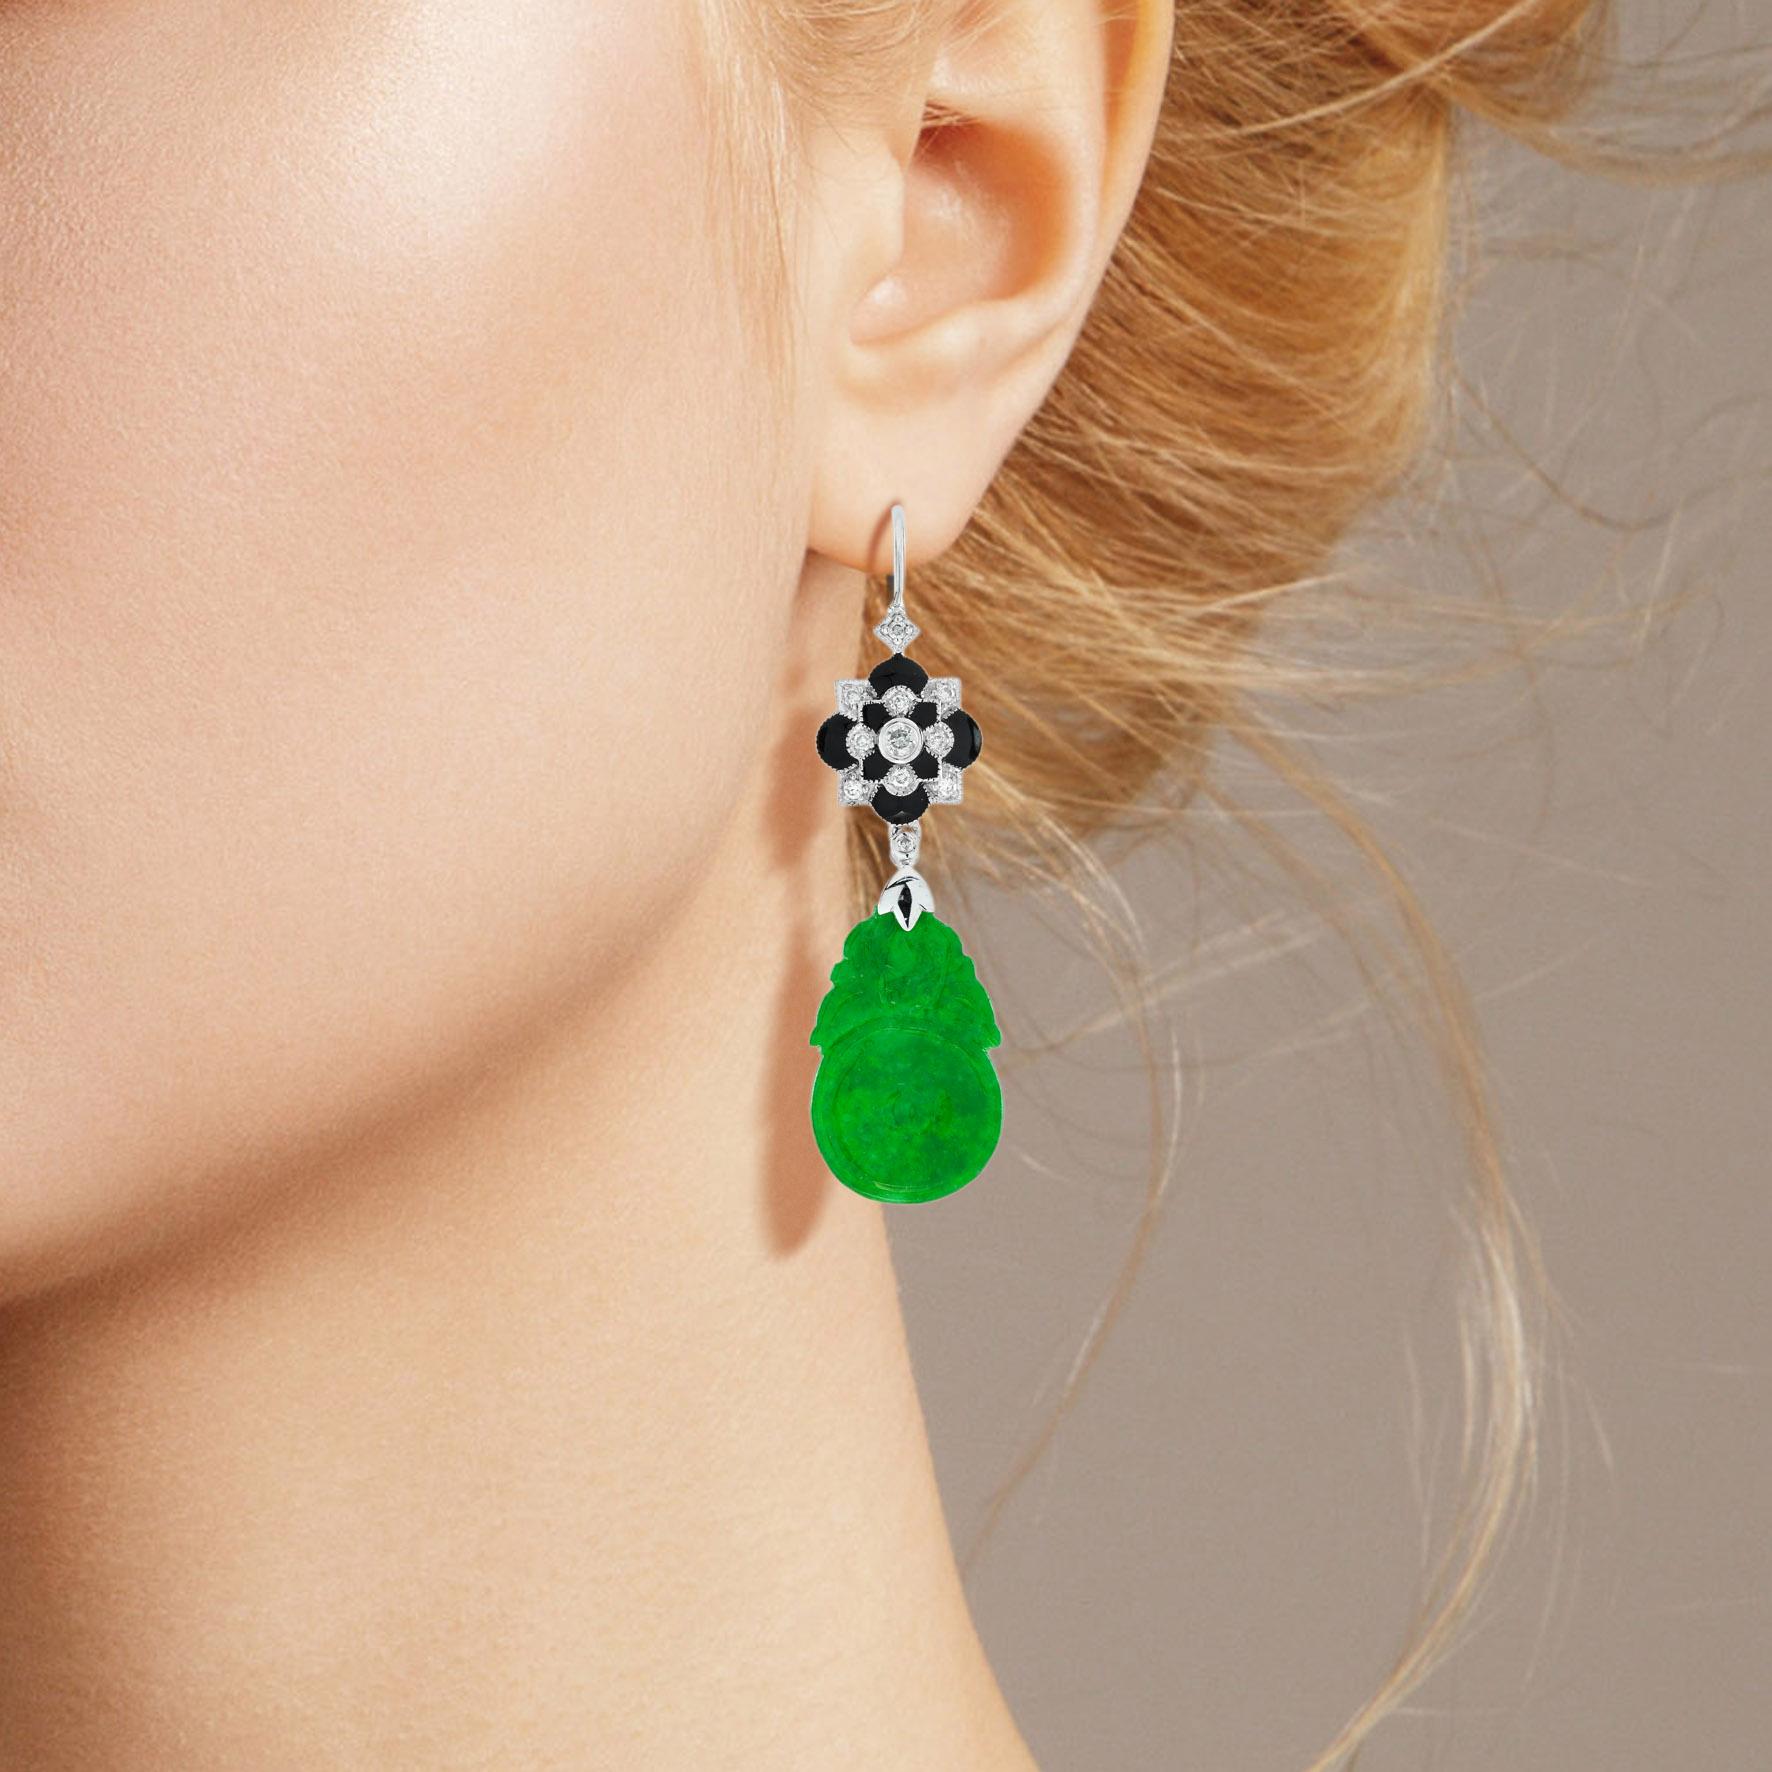 The natural jade in these lovely earrings has some very special shape. Both pieces have a strong green color and well orange fruit carvings. The jade is suspended in a 9k white gold setting with diamond floral on the top. The earrings transfer their